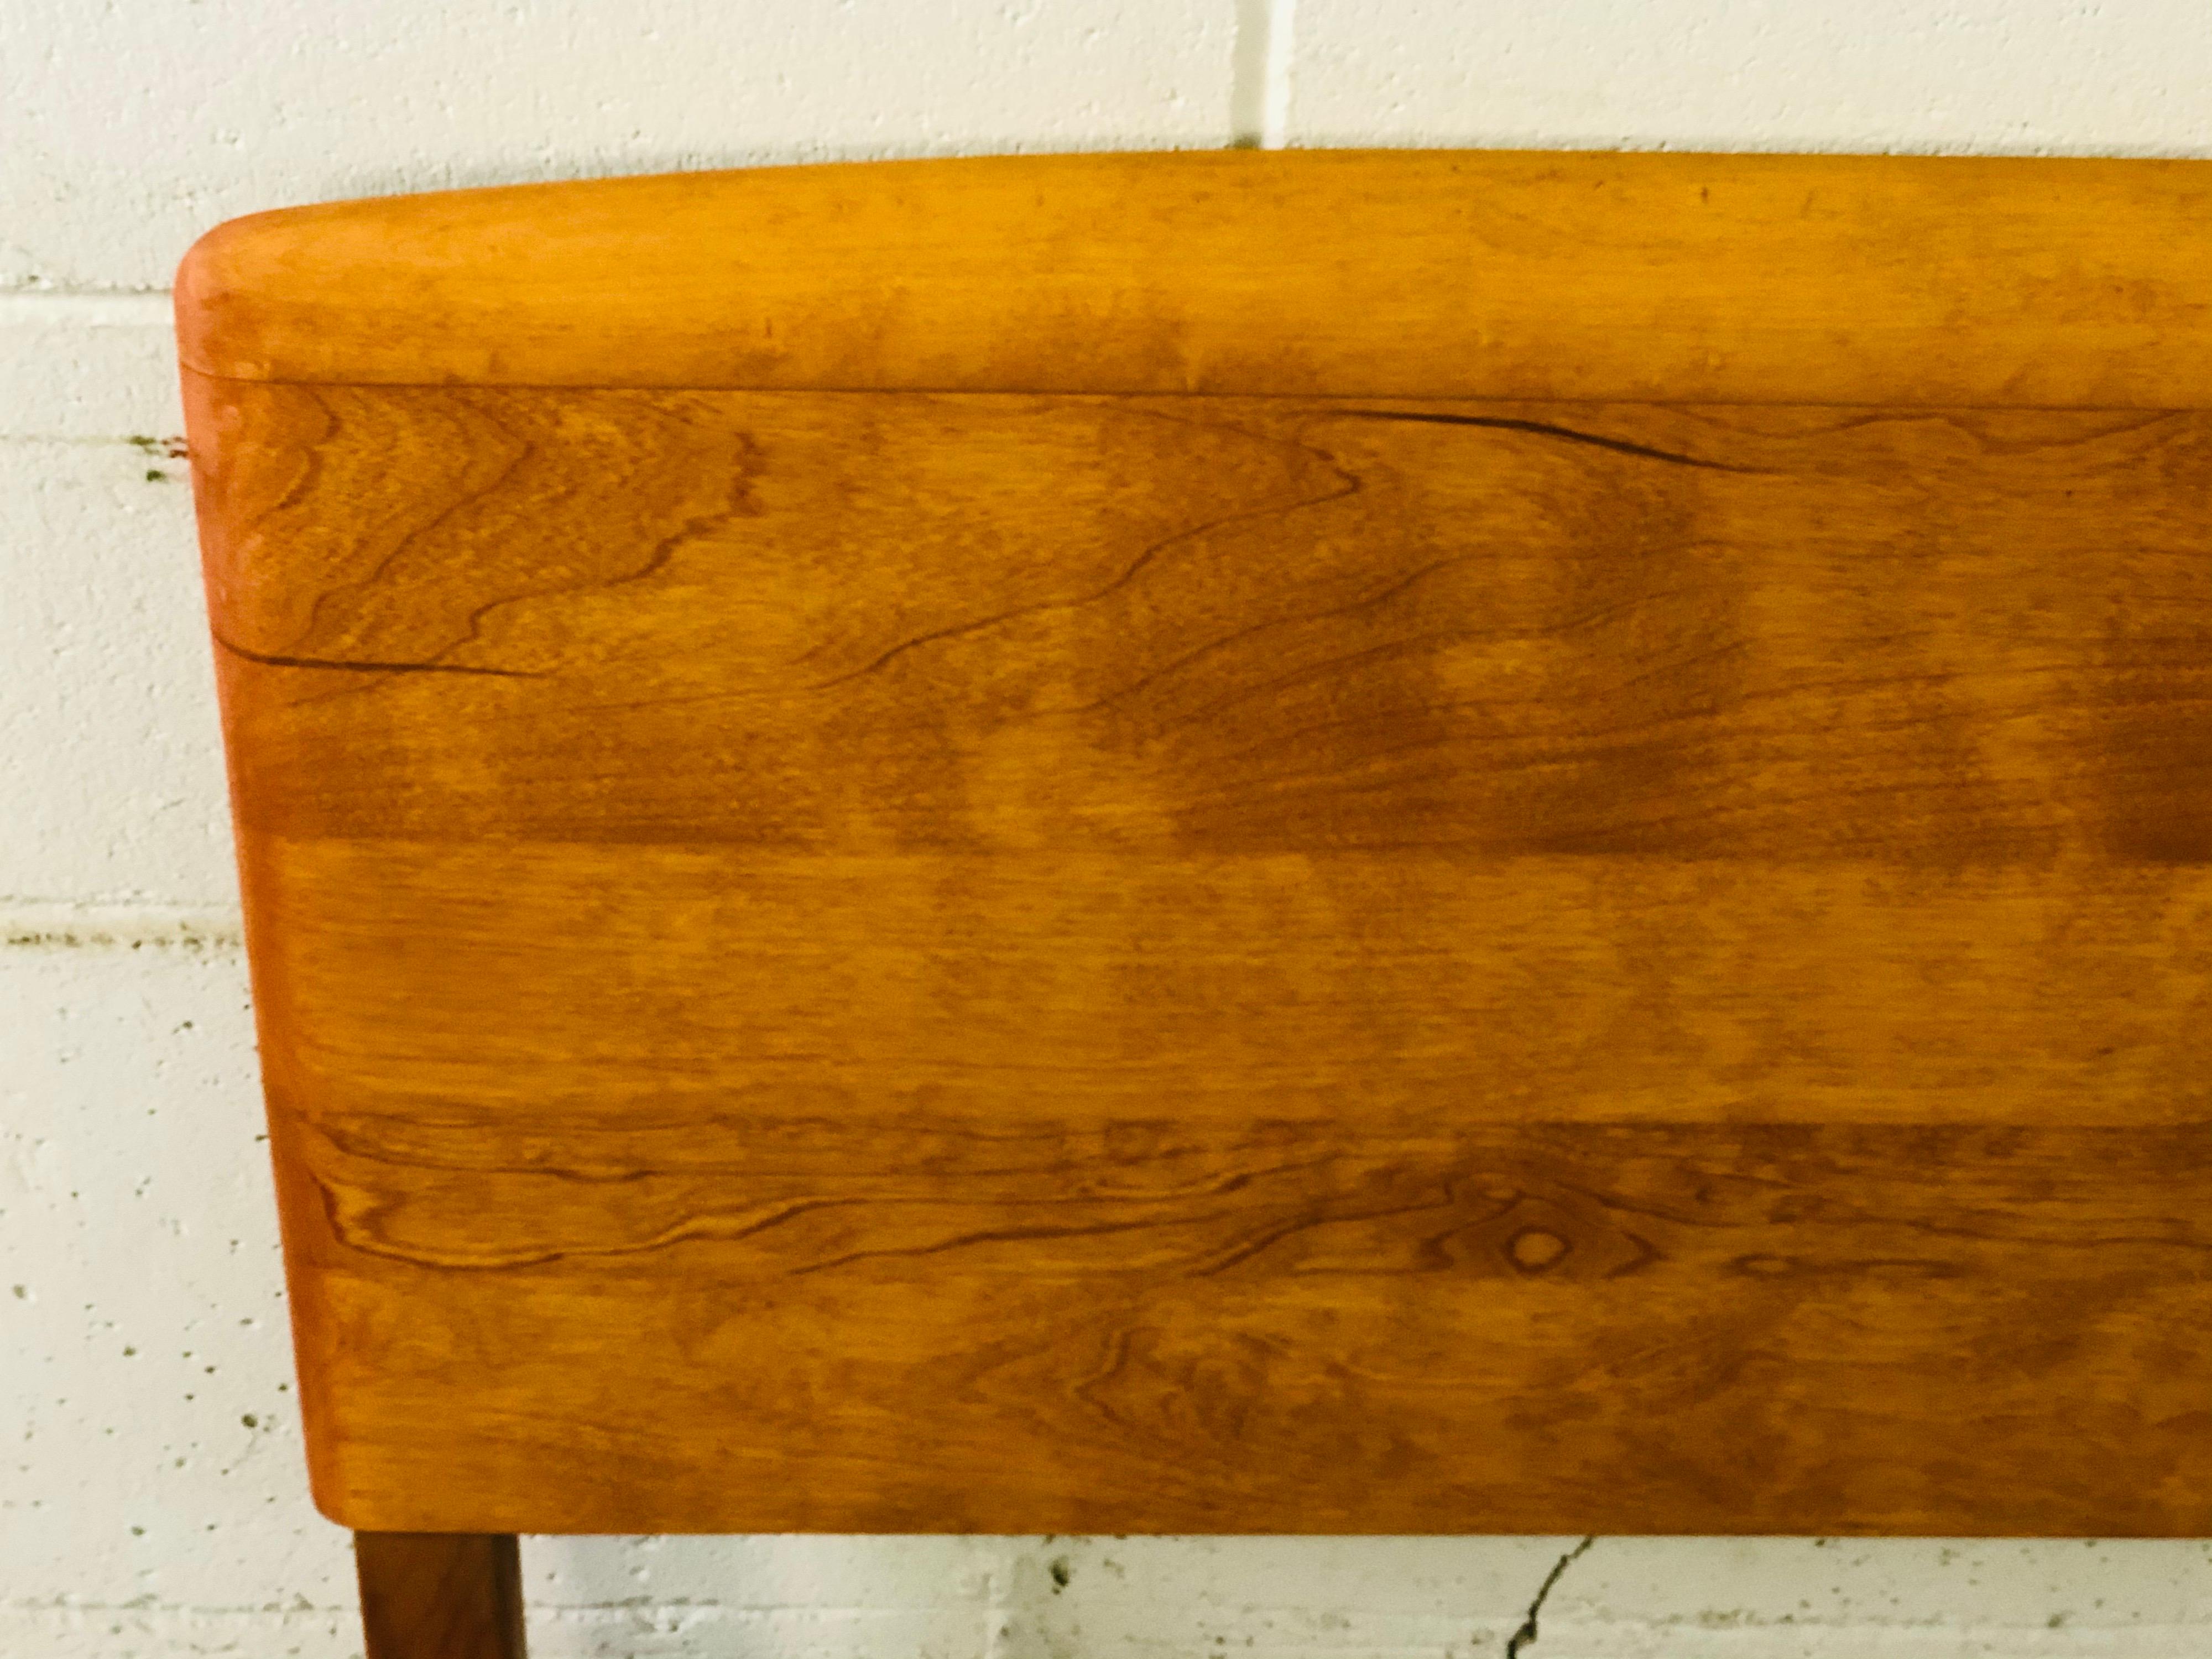 Vintage Heywood-Wakefield maple wood queen size headbaord with a curved top design. The rail slots are 55” apart. The headboard is newly refinished and marked.